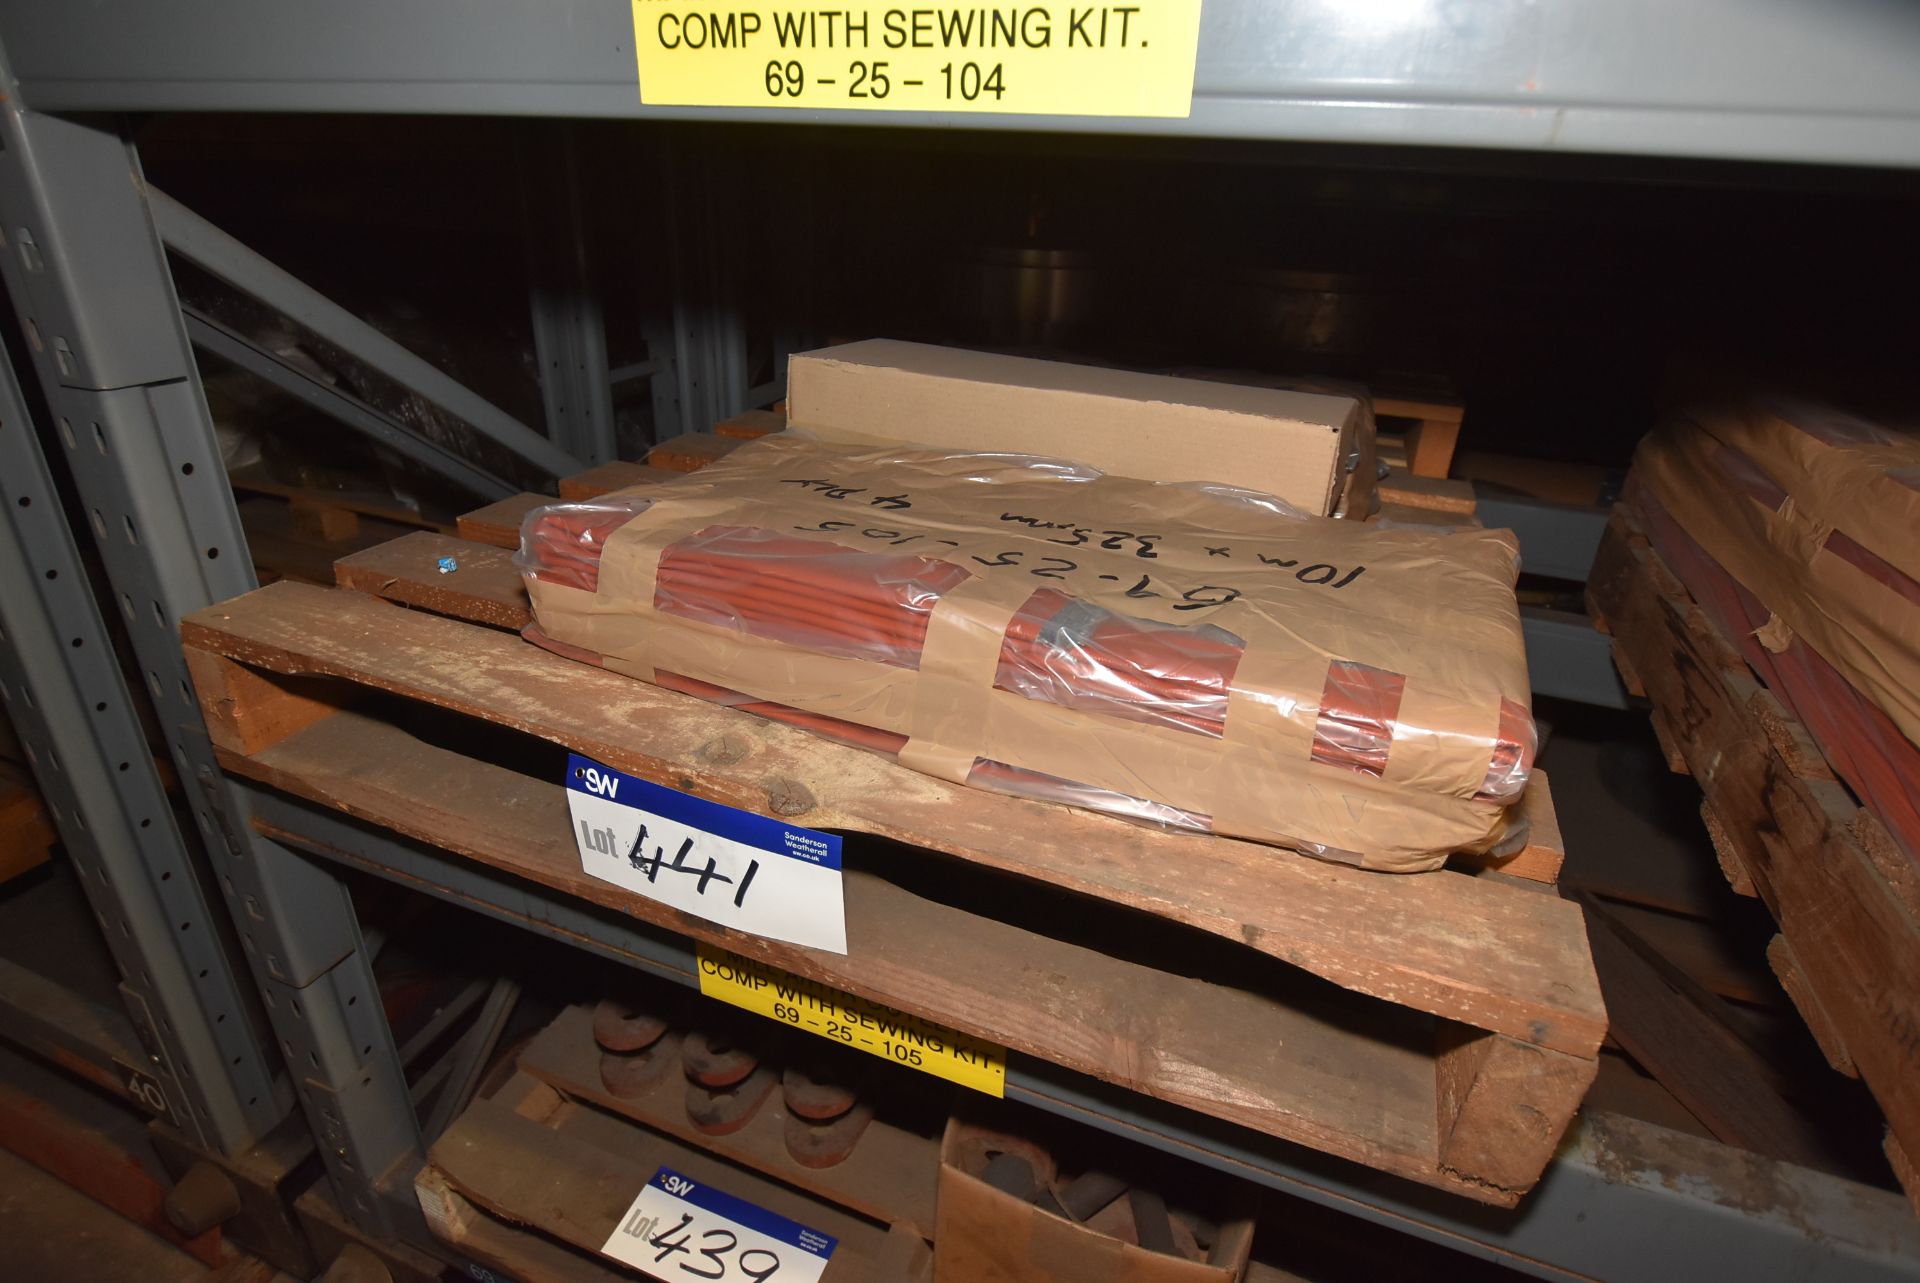 Joint Expansion Medium, on pallet (69-25-105/ Bay 39) (please note this lot is part of combination